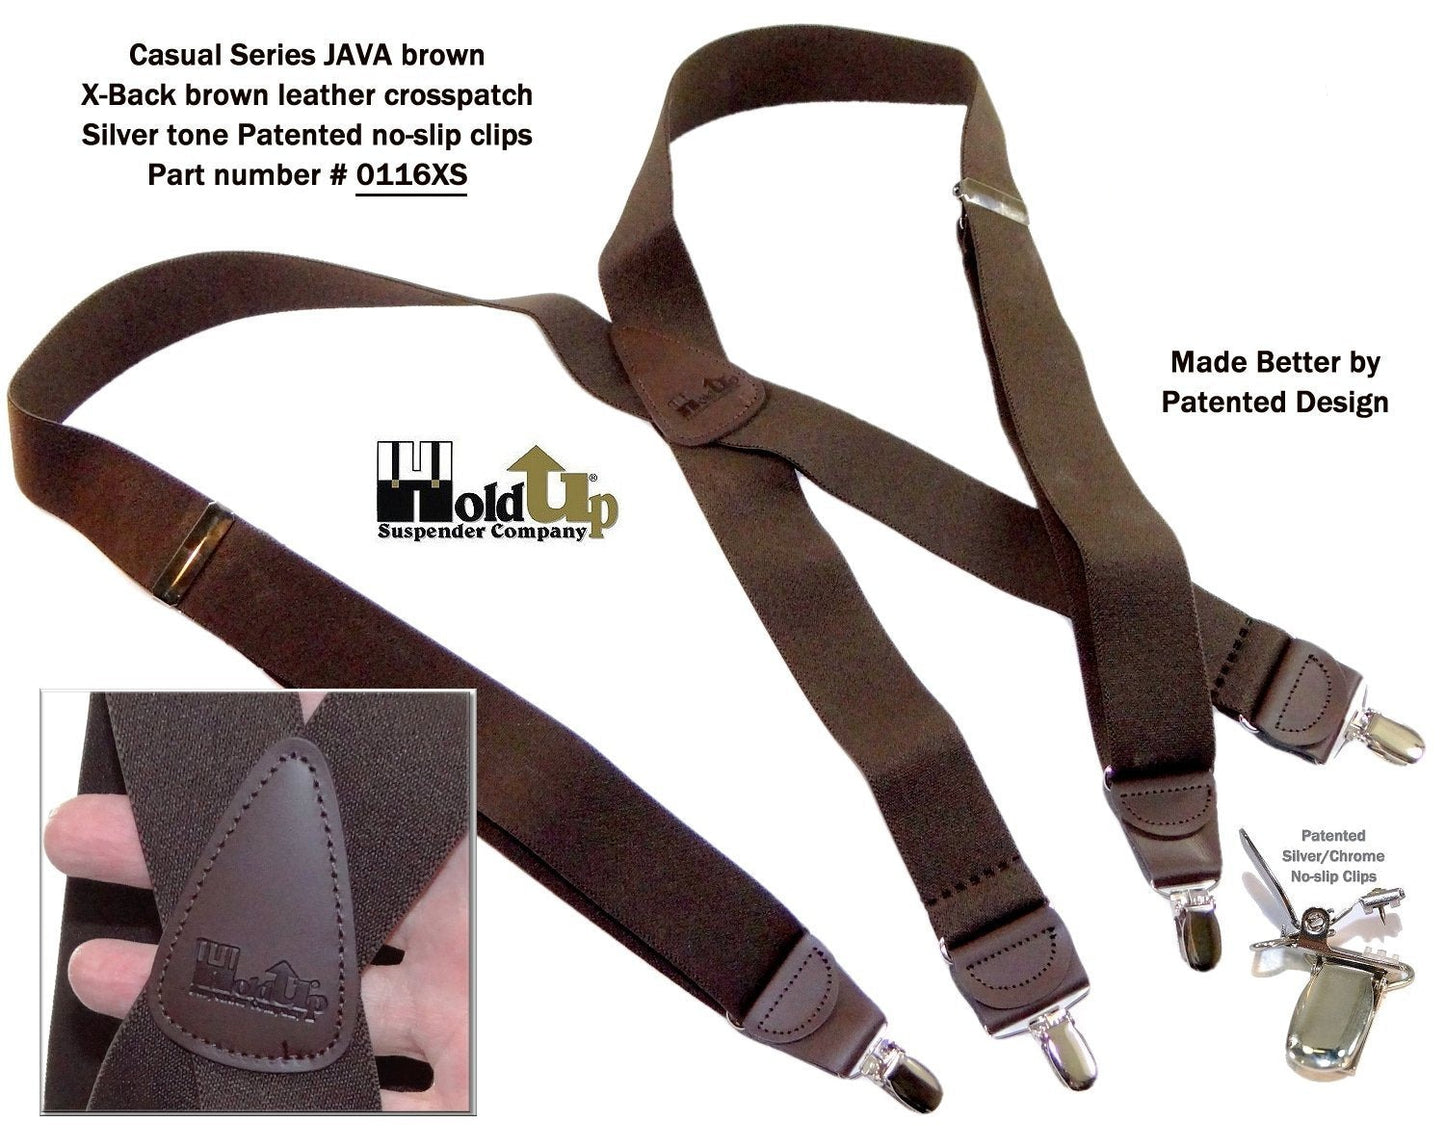 Holdup Suspender Company's Dark Java Brown Casual Series X-back Suspenders with Patented No-slip Nickel plated Clips